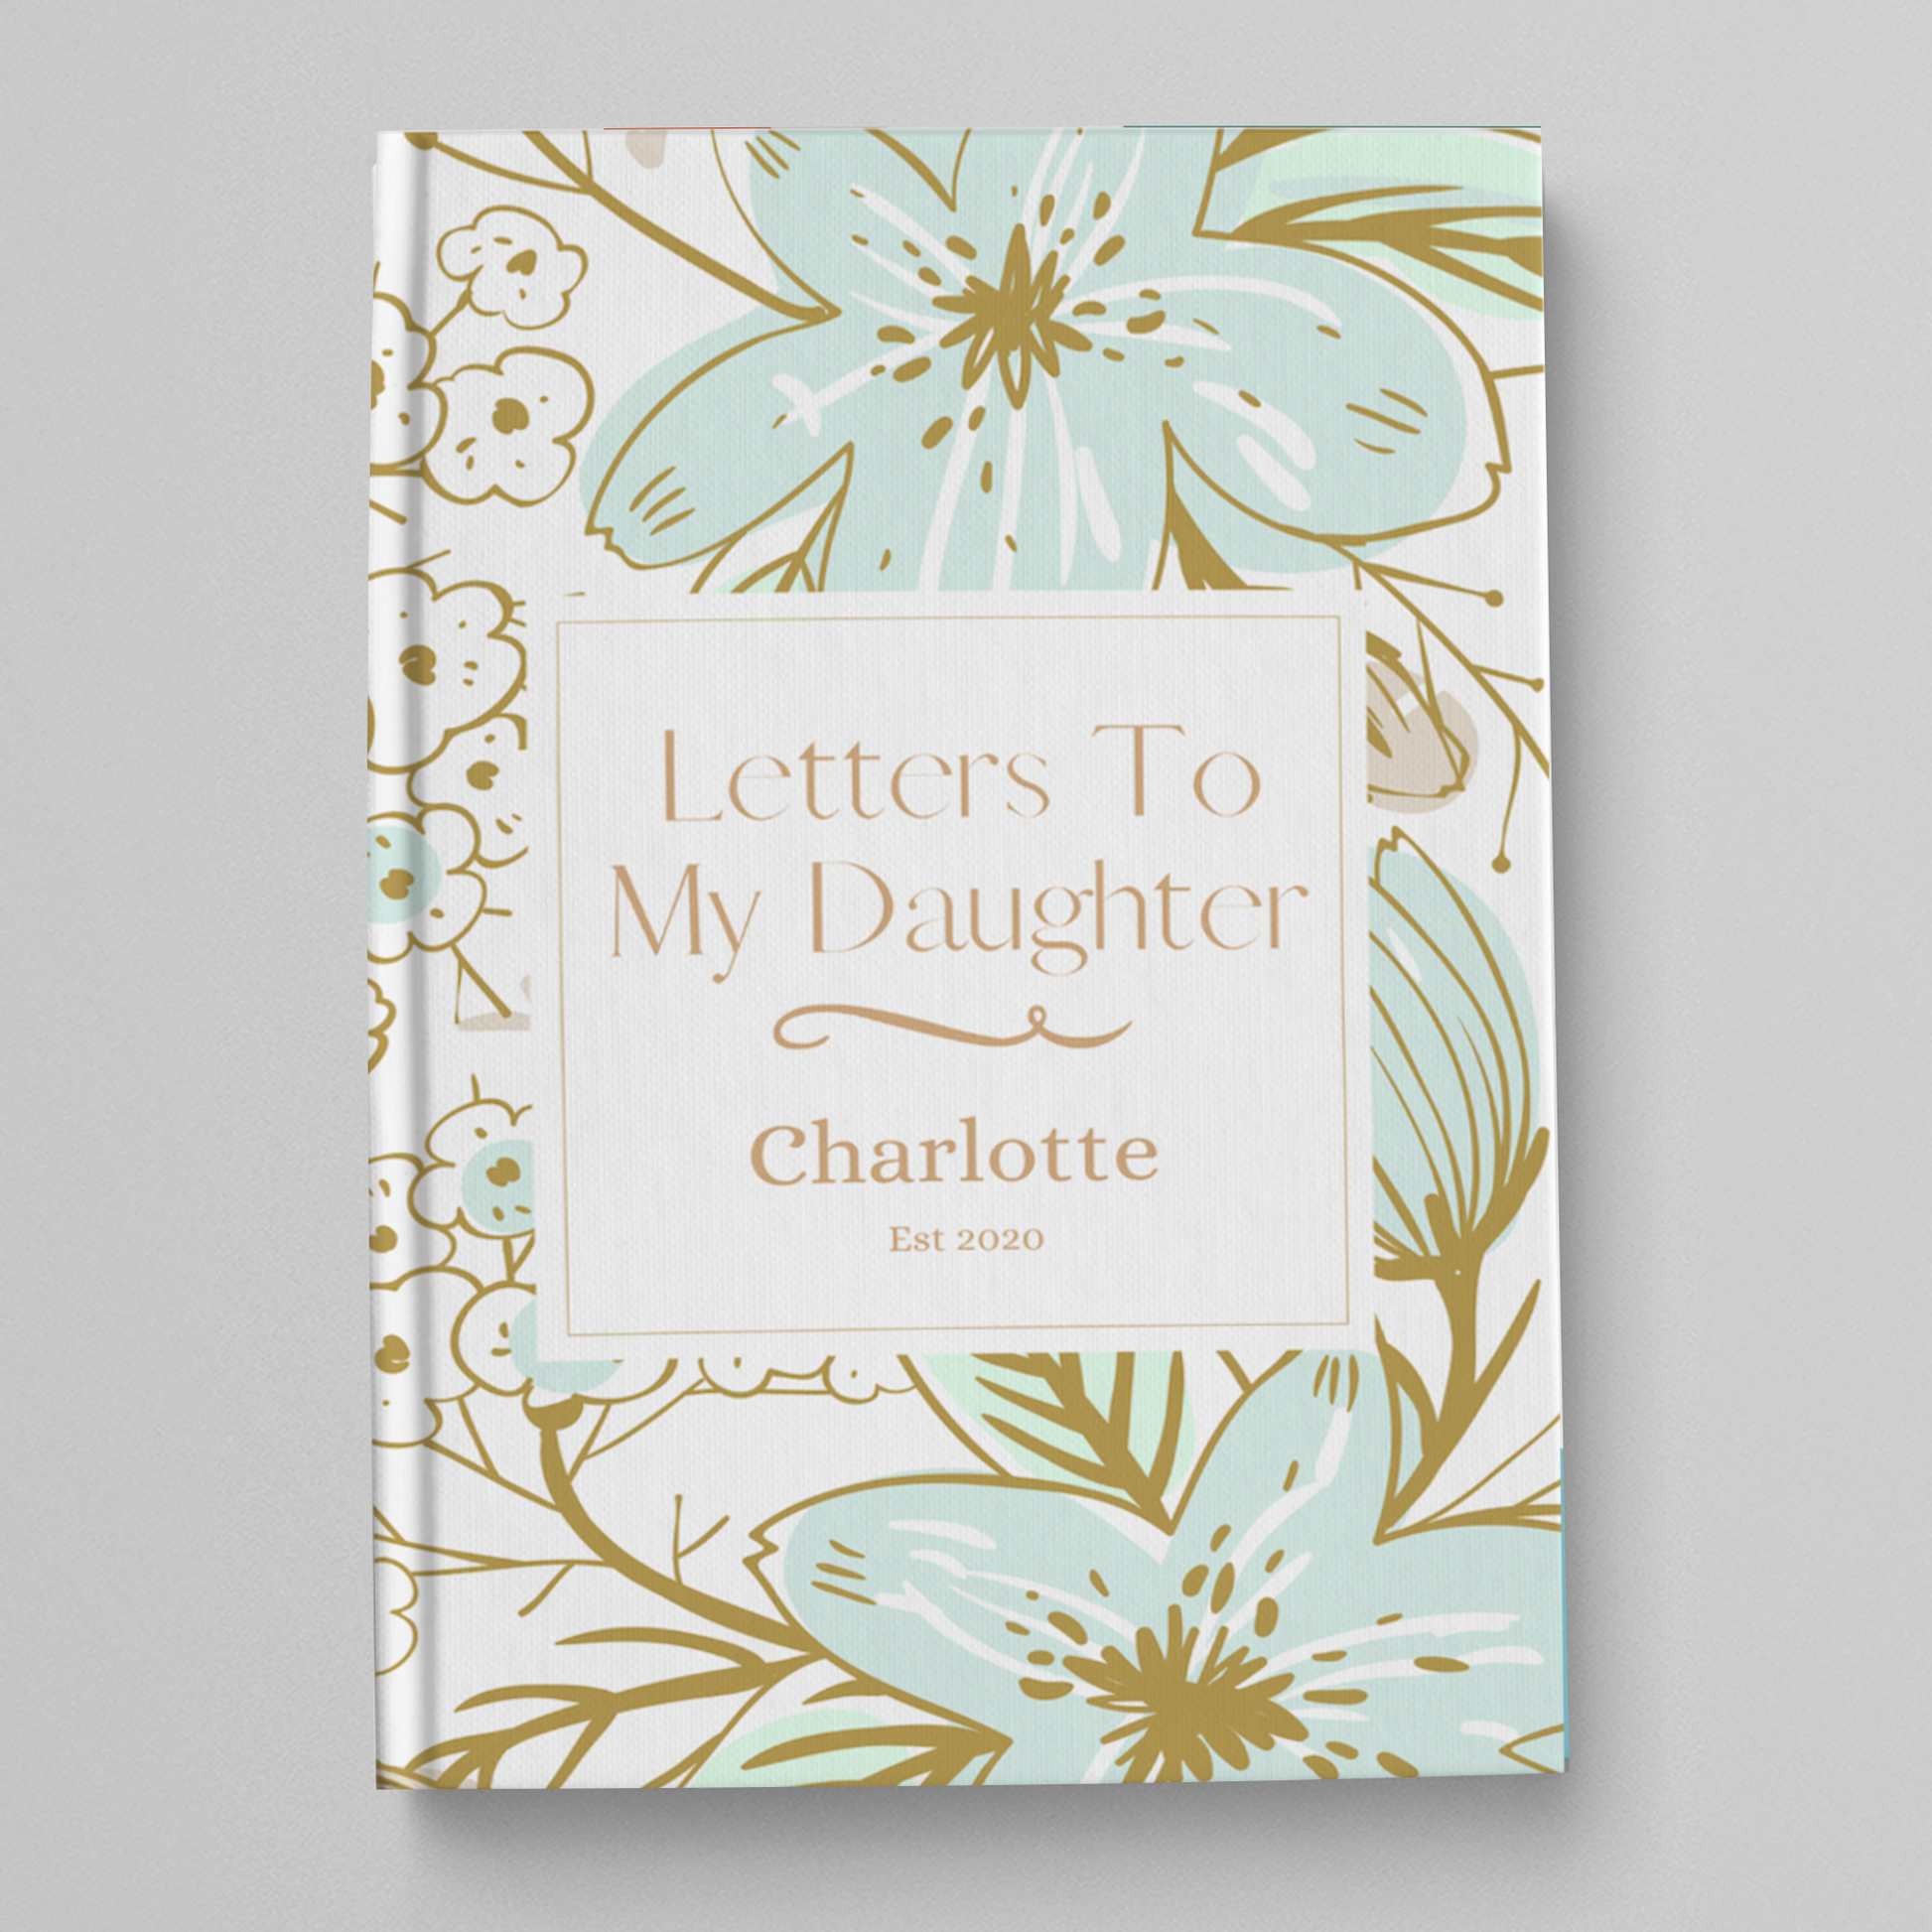 Custom Gift For Daughter From Mom. Letters To My Daughter. Luhvee Books.